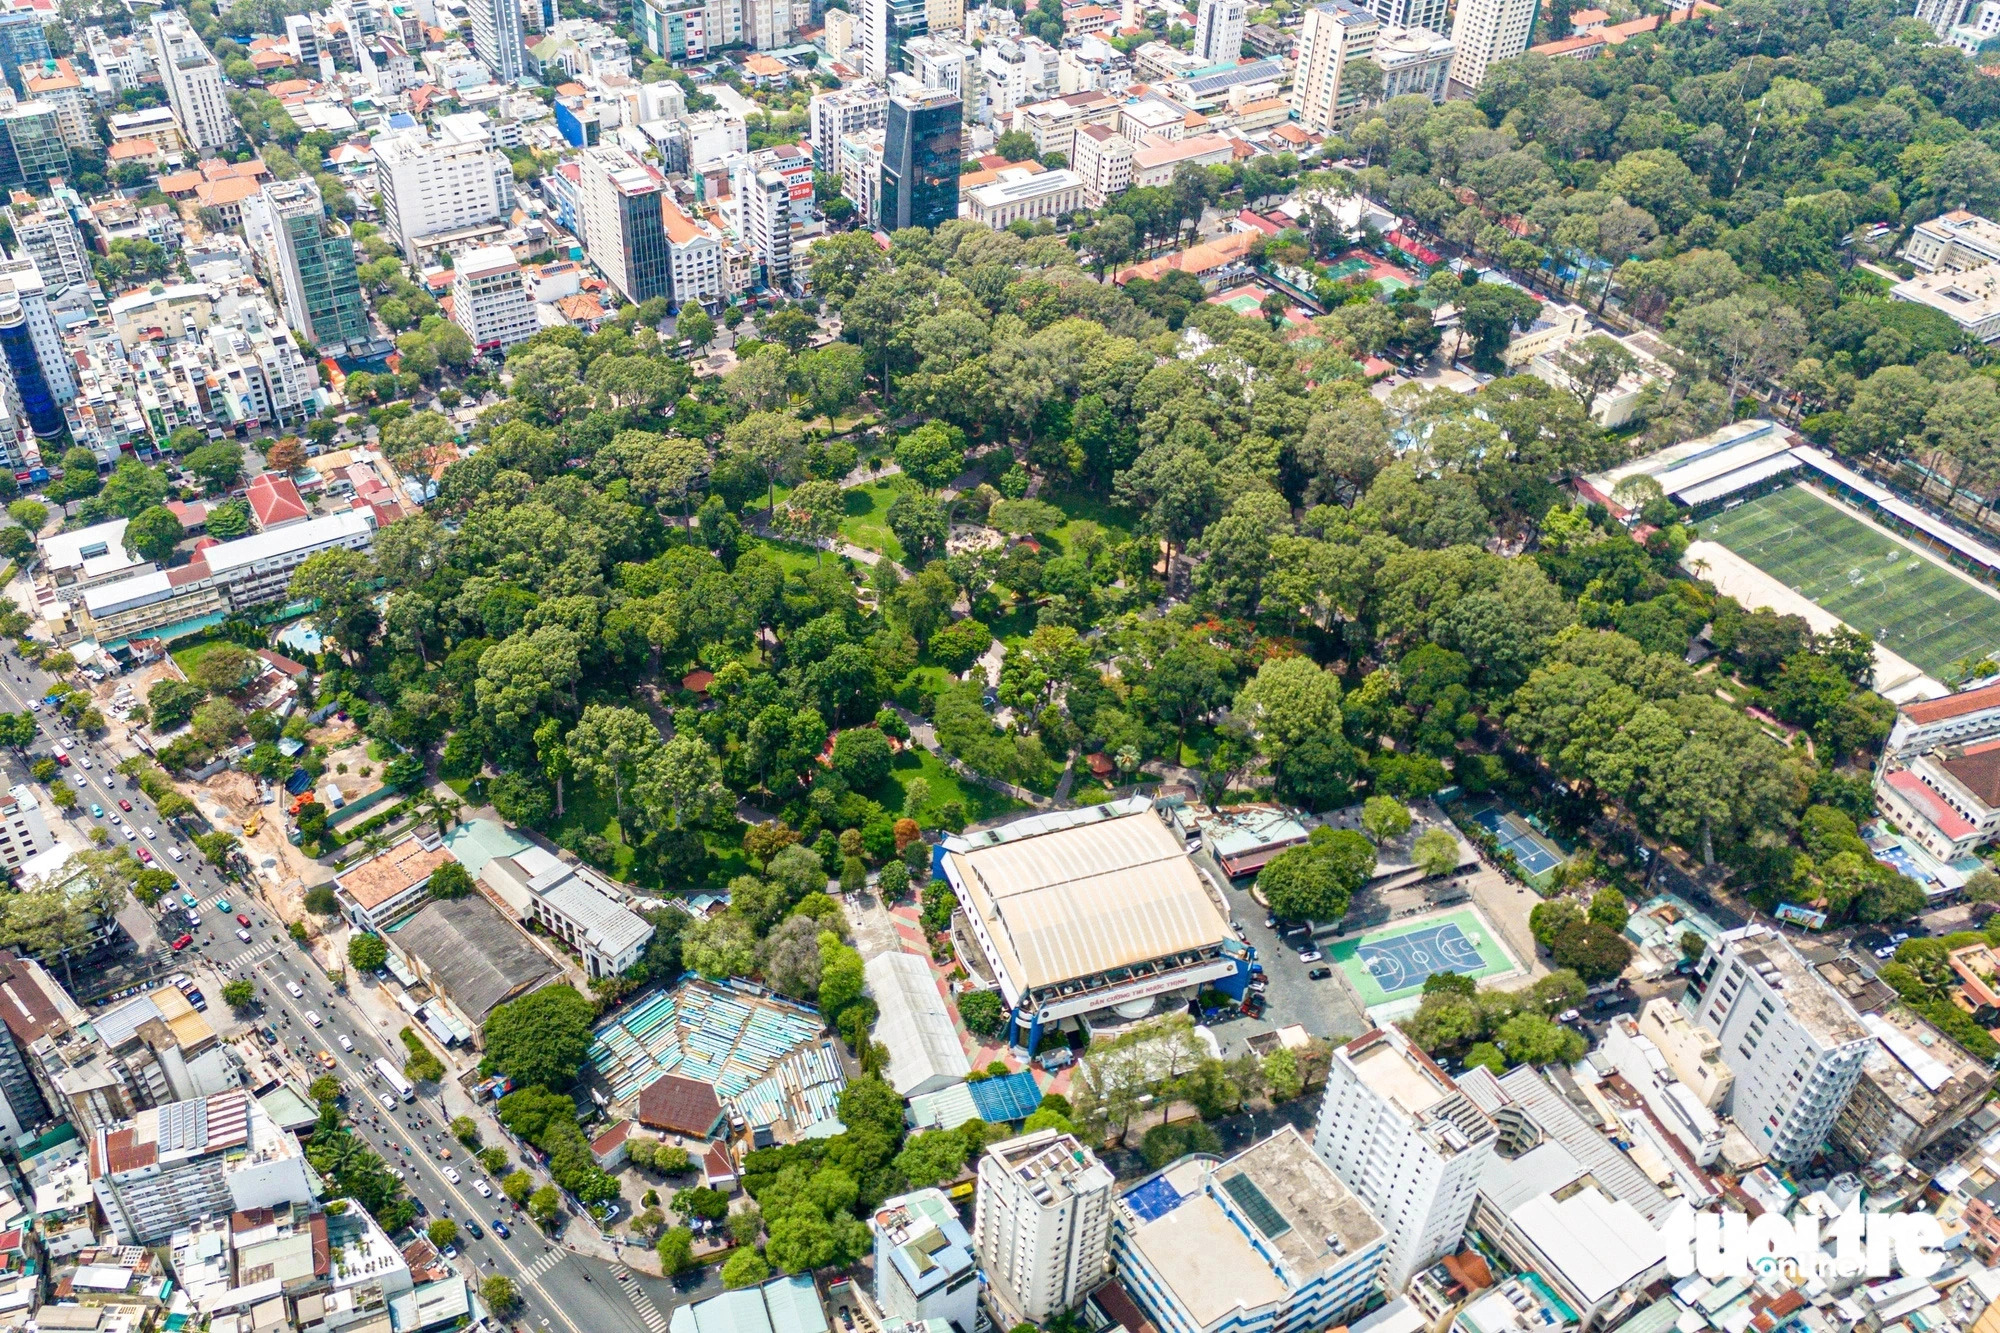 Covering an area of over 10 hectares, the Tao Dan Park sits along Truong Dinh Street in Ben Thanh Ward, District 1. The park is home to more than 1,000 trees, including lots of ancient trees. Photo: Phuong Quyen / Tuoi Tre